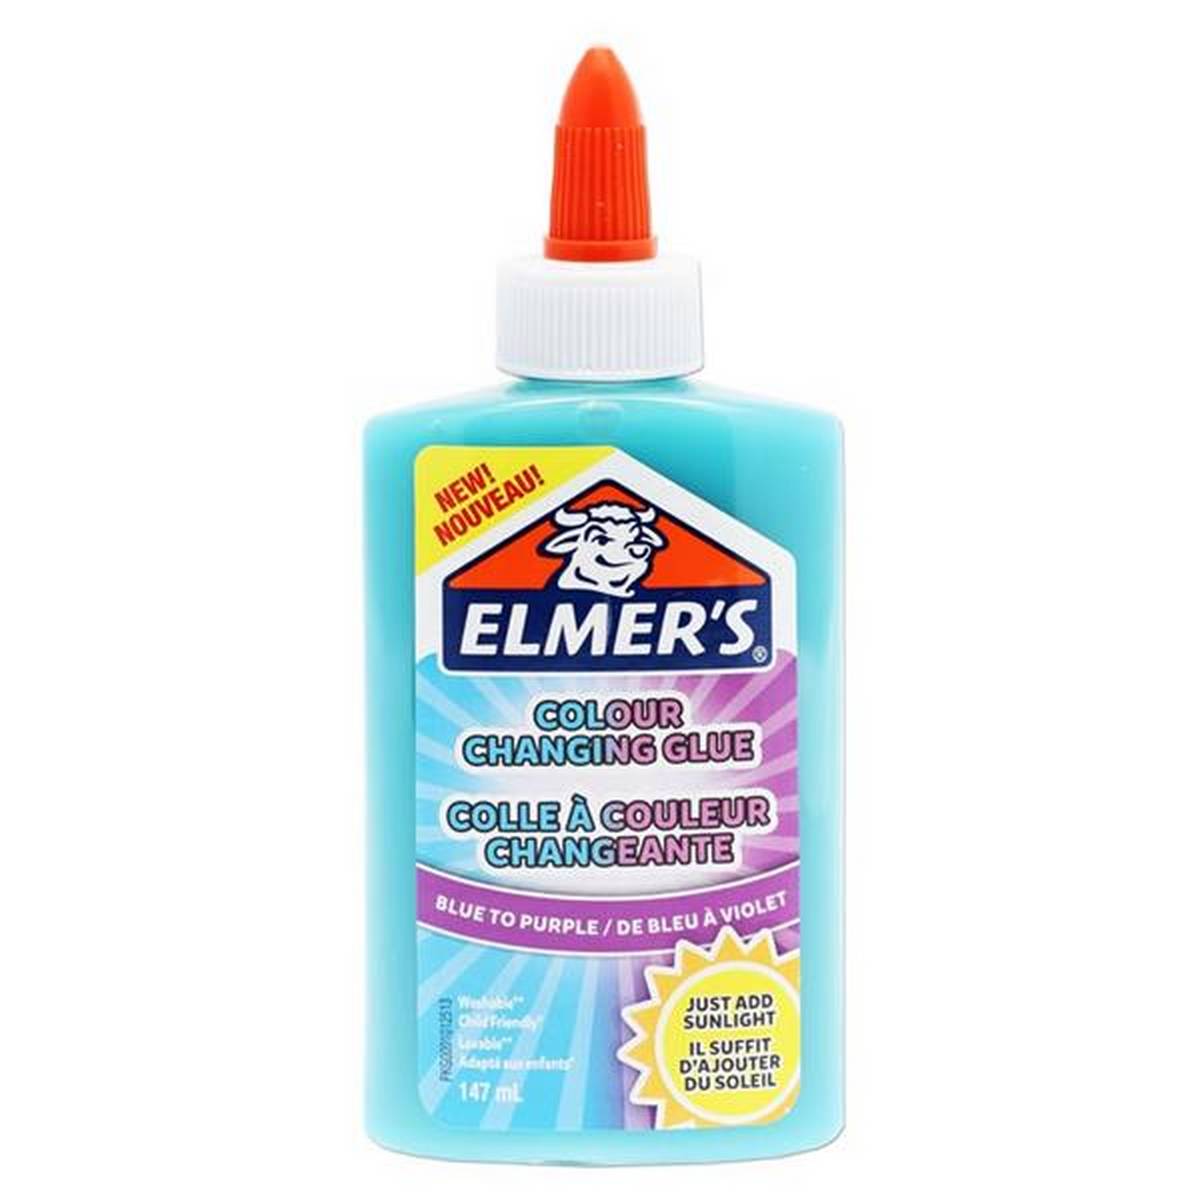 Elmer's 147ml Colour Changing Slime Glue - Blue To Purple